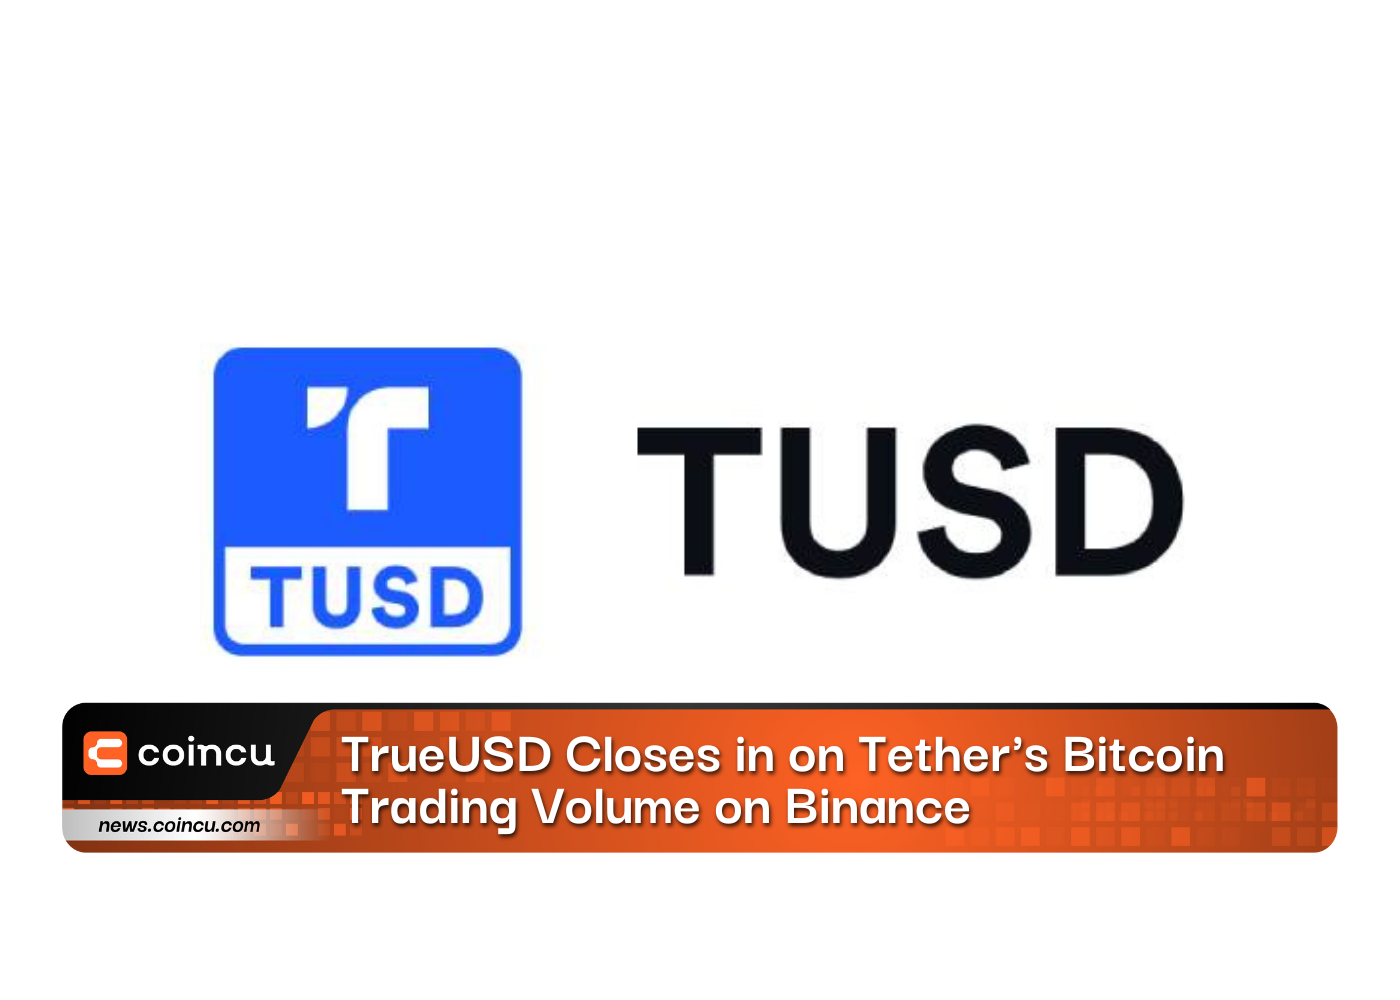 TrueUSD Closes in on Tethers Bitcoin